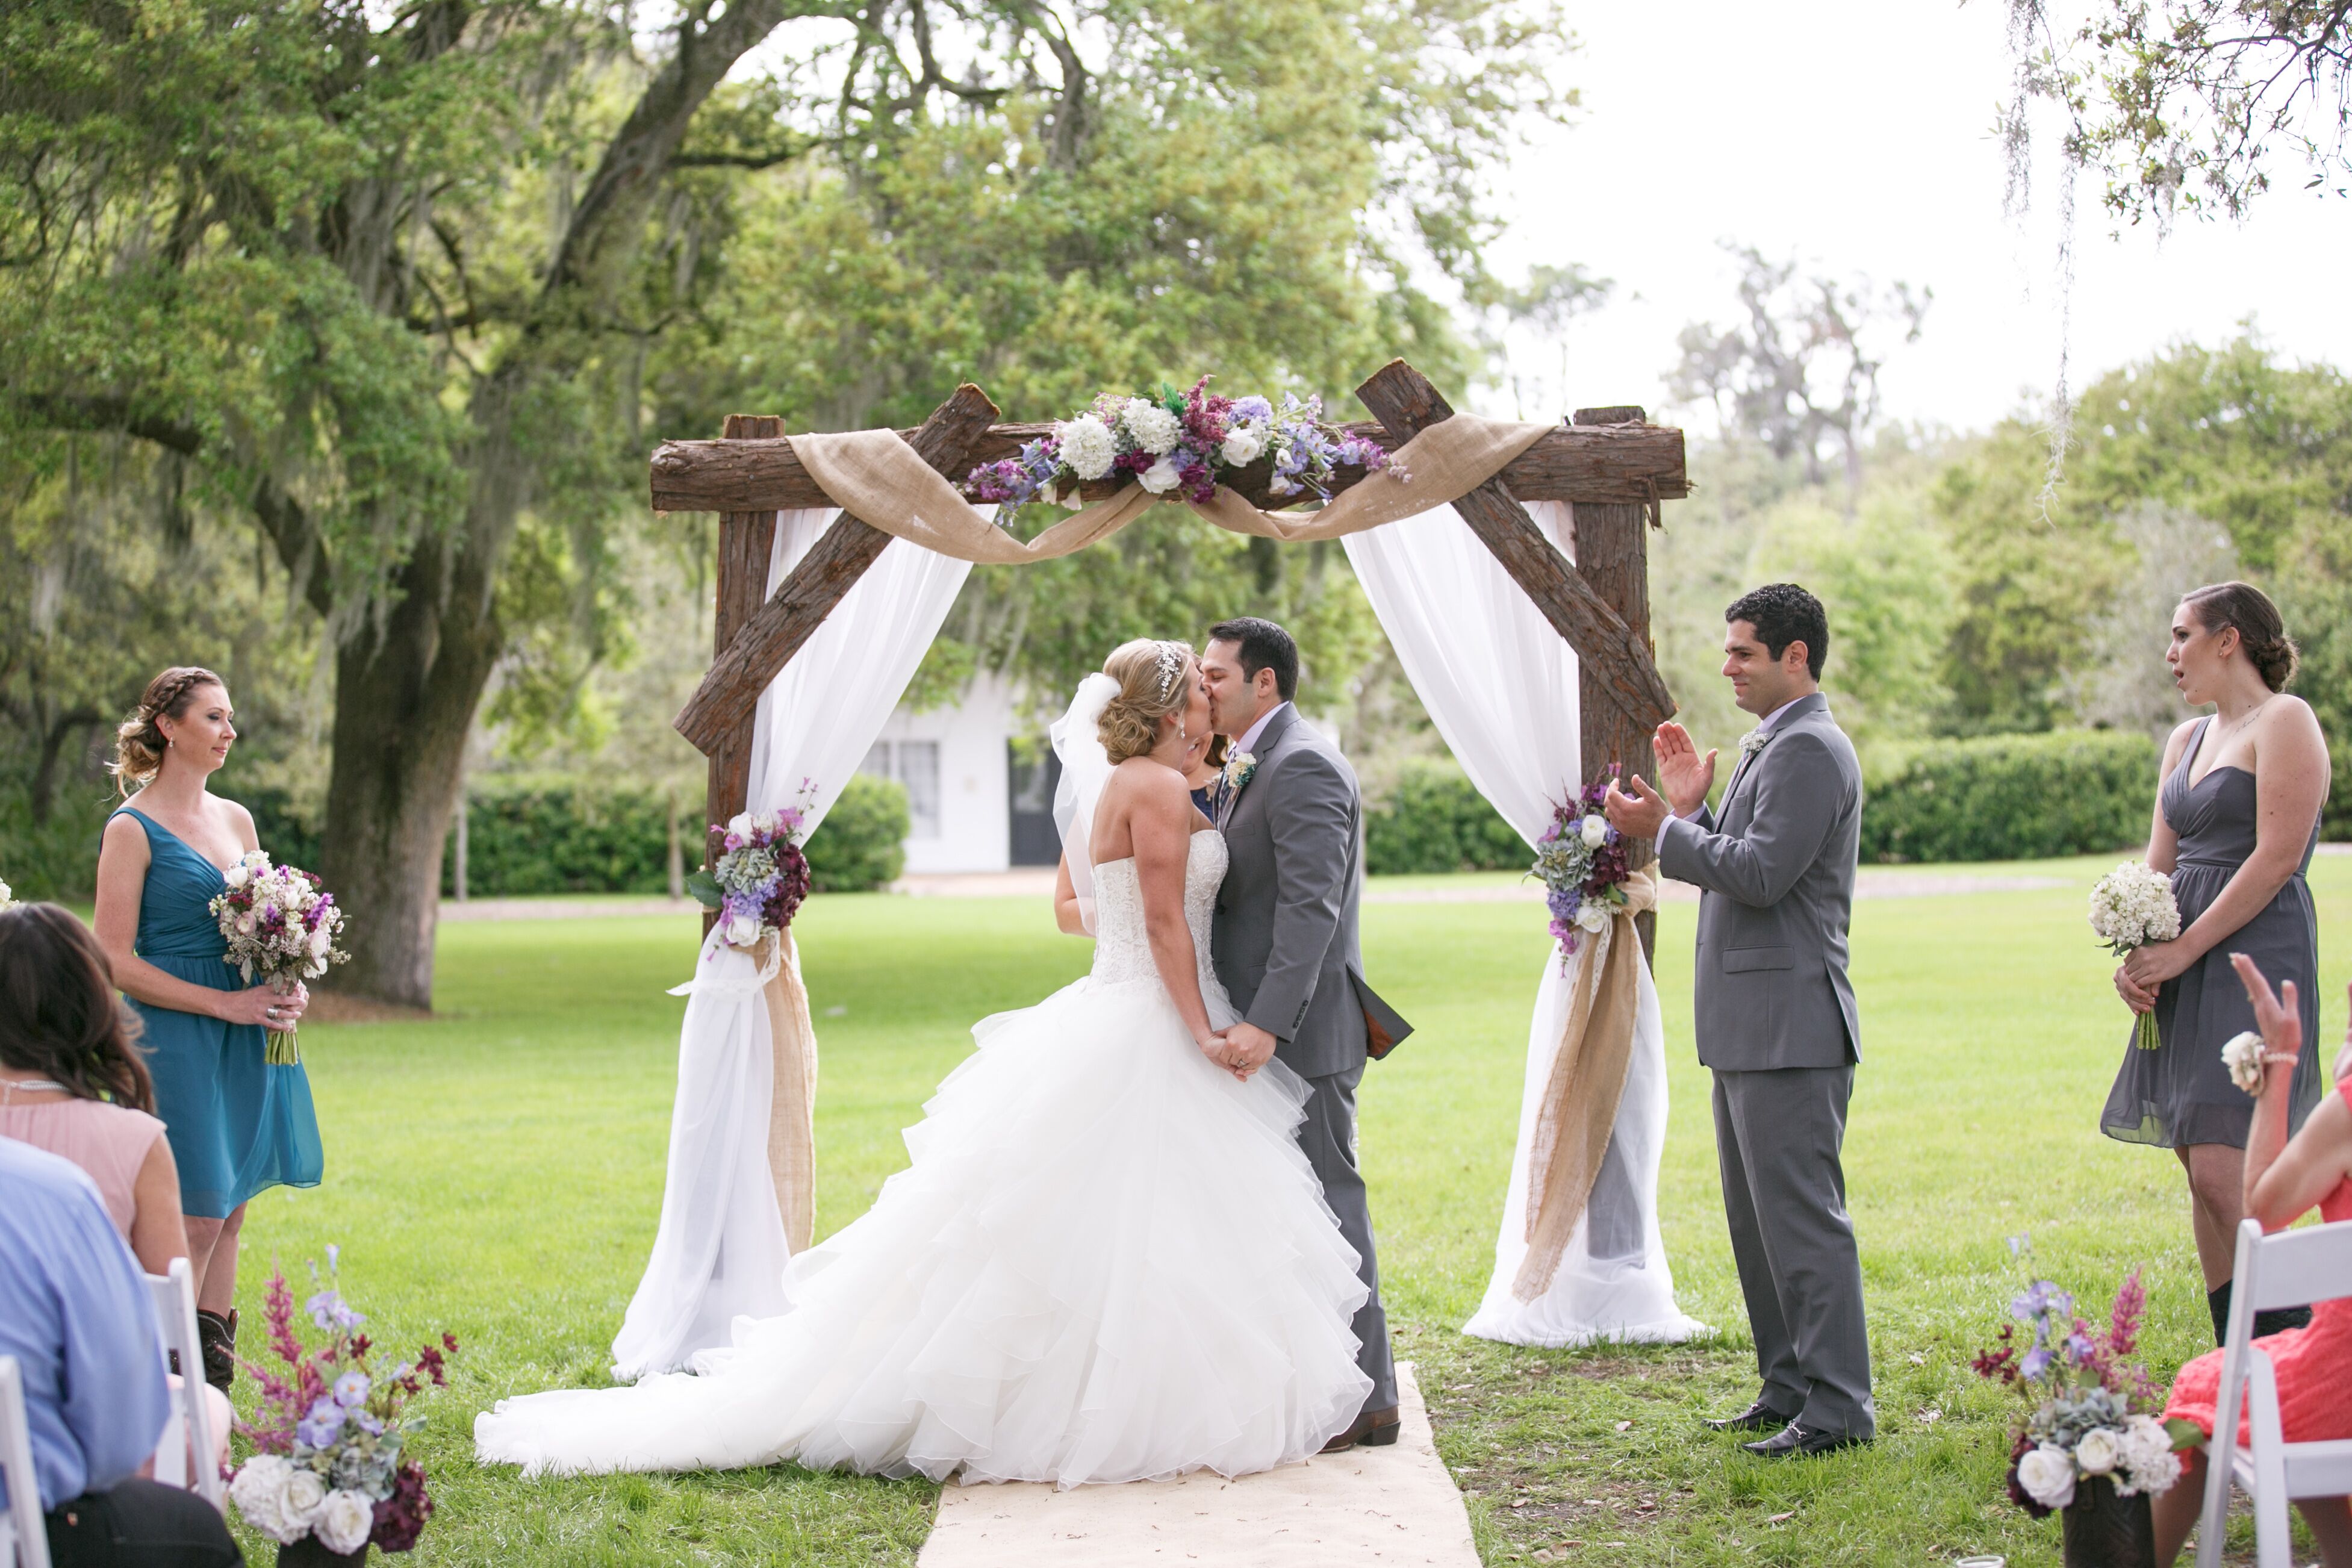 Check out this rustic wedding arch with draped burlap and see more inspirat...